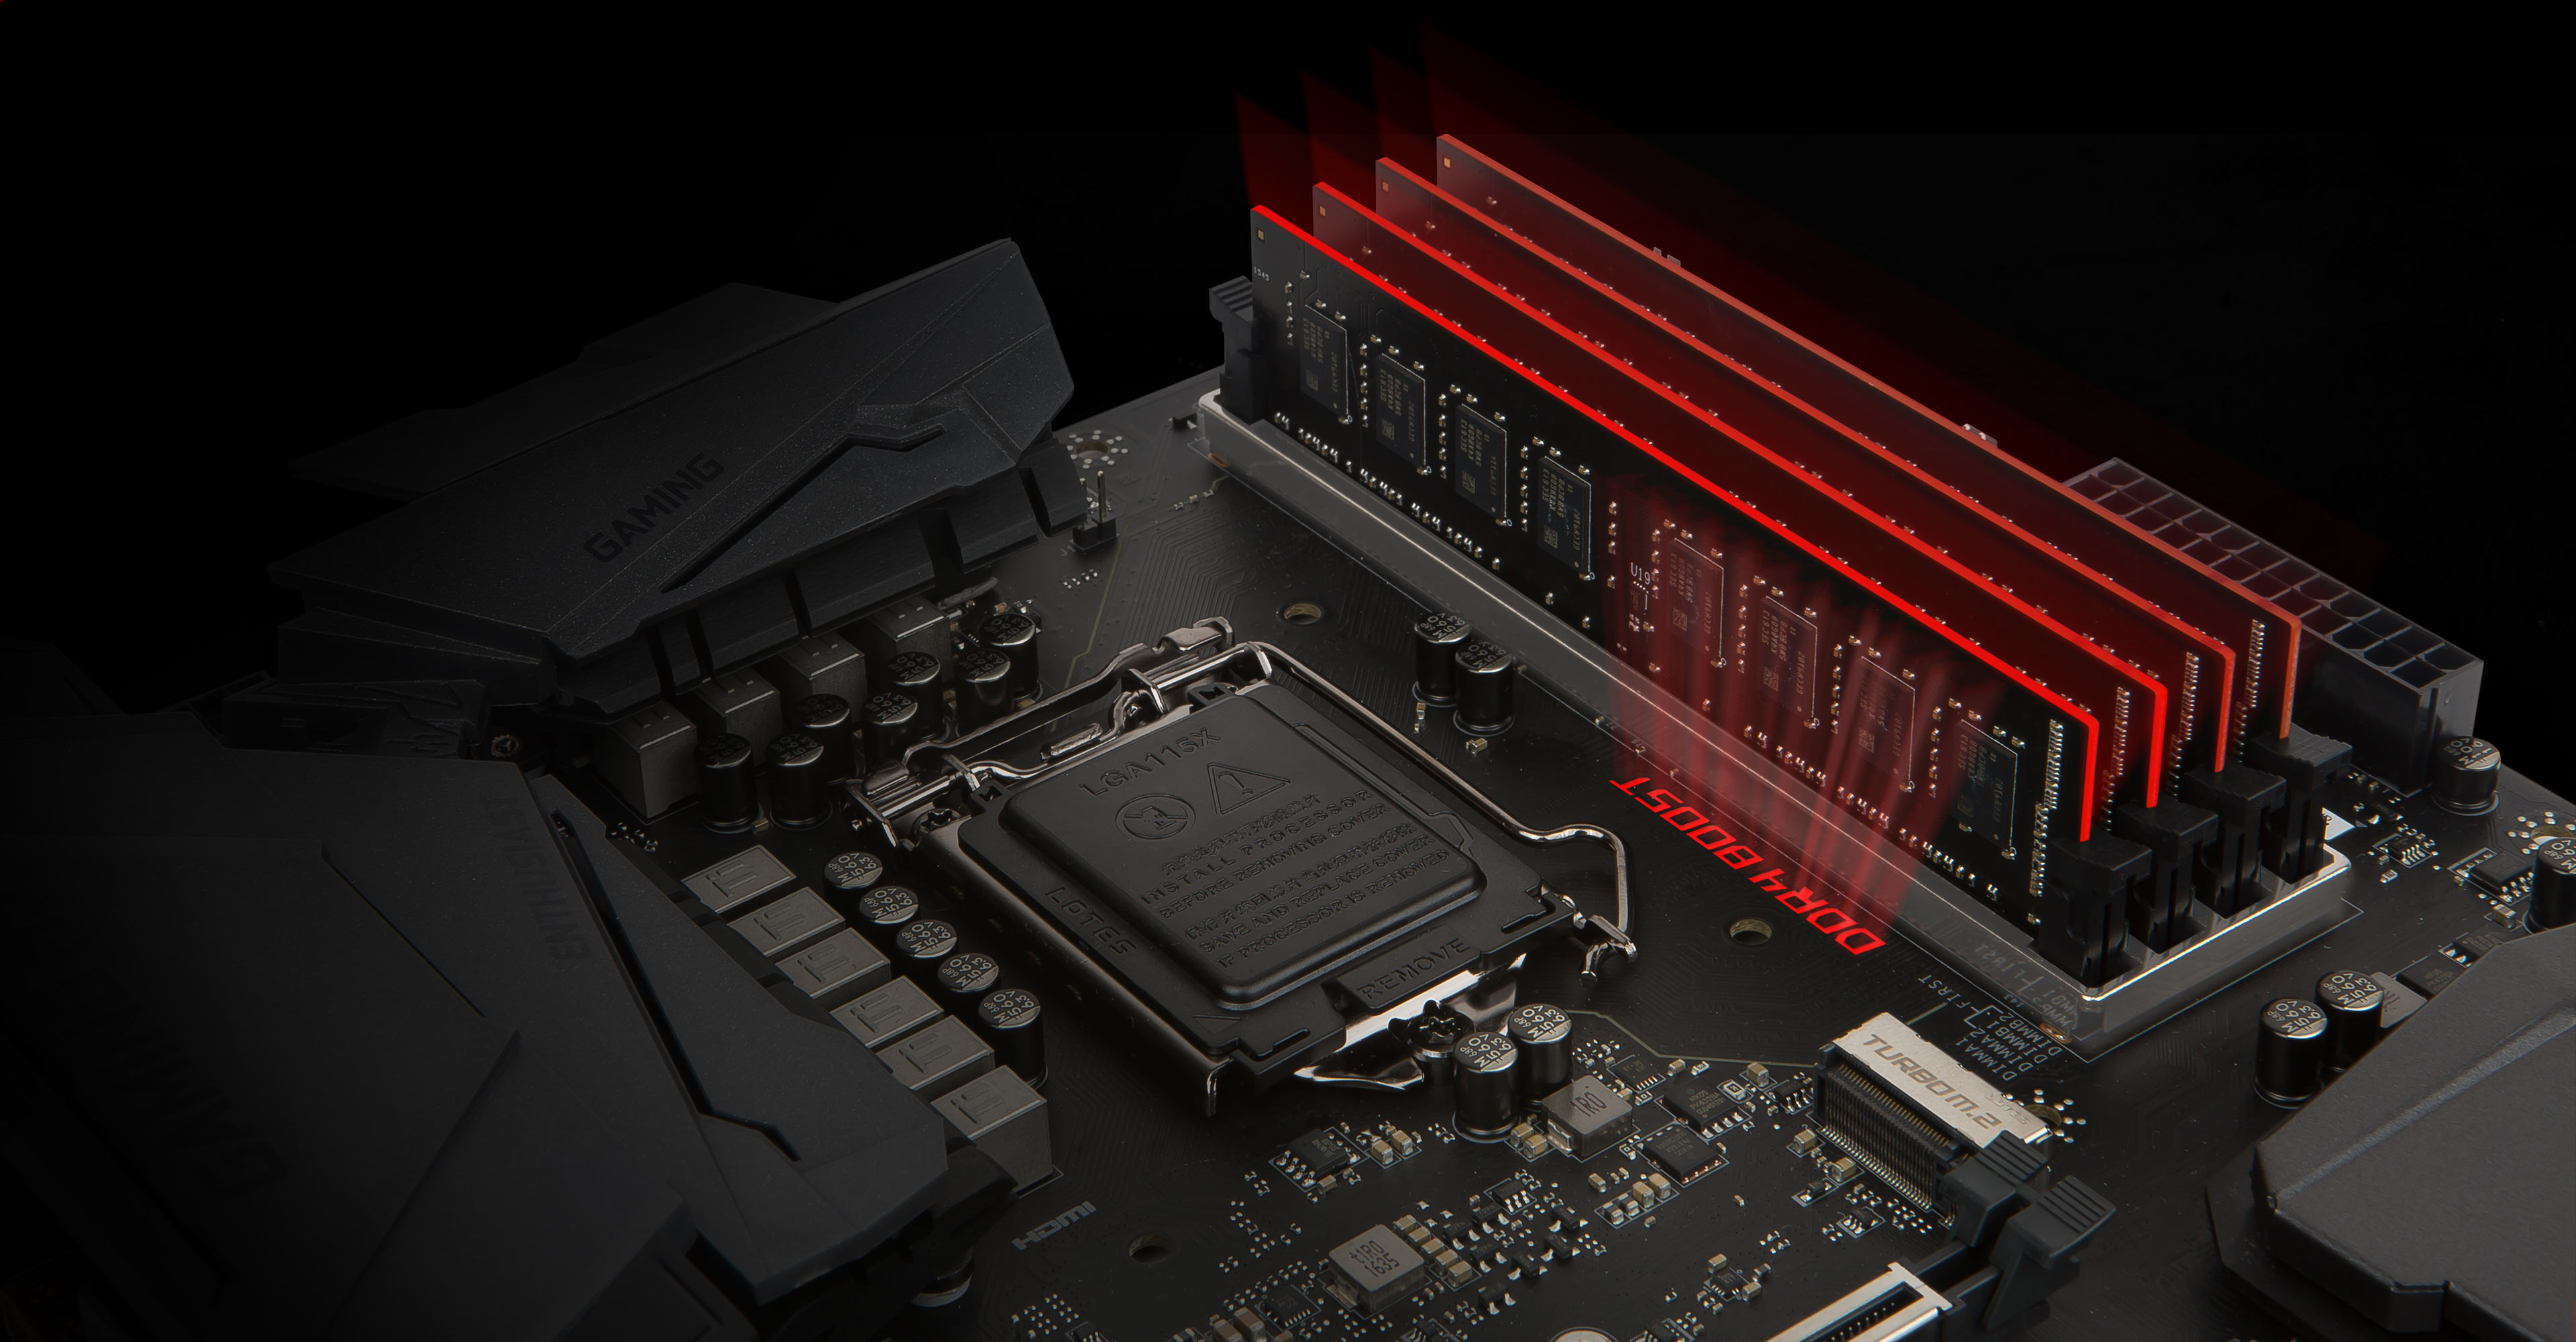 Download Drivers for MSI’s Z270 GAMING M6 AC Motherboard